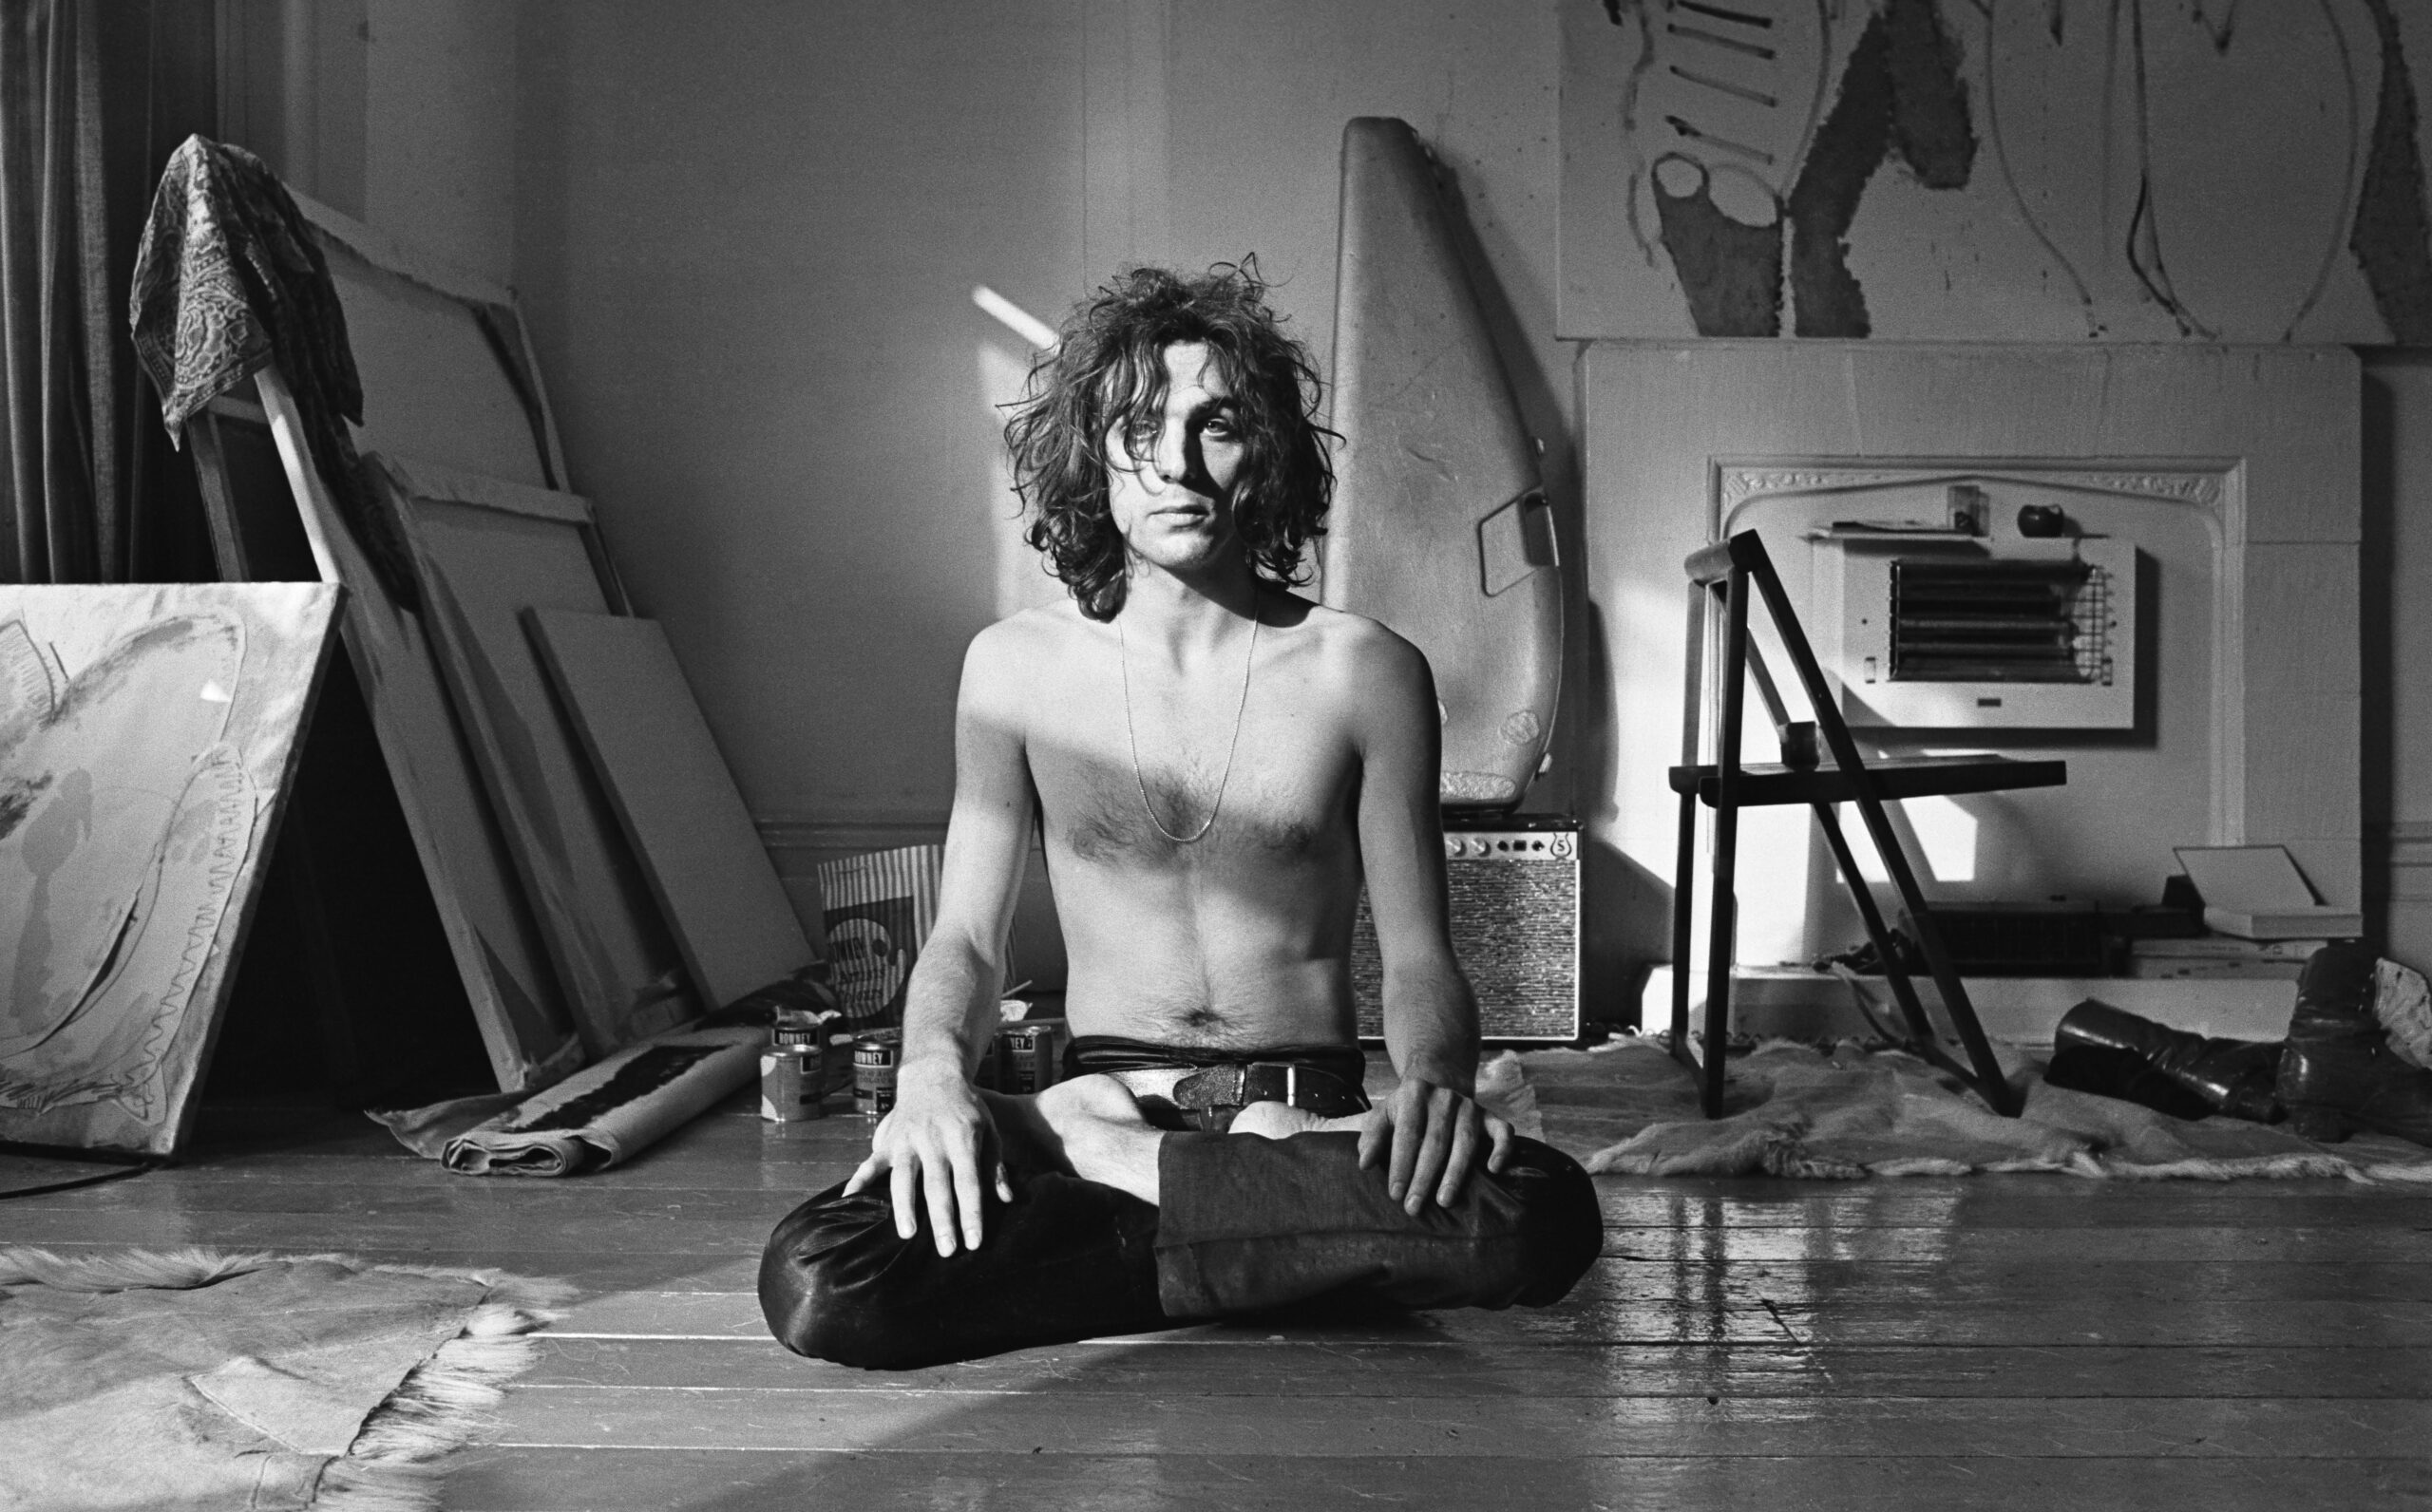 First Trailer Unveiled for Syd Barrett Doc <i>Have You Got It Yet?</i>